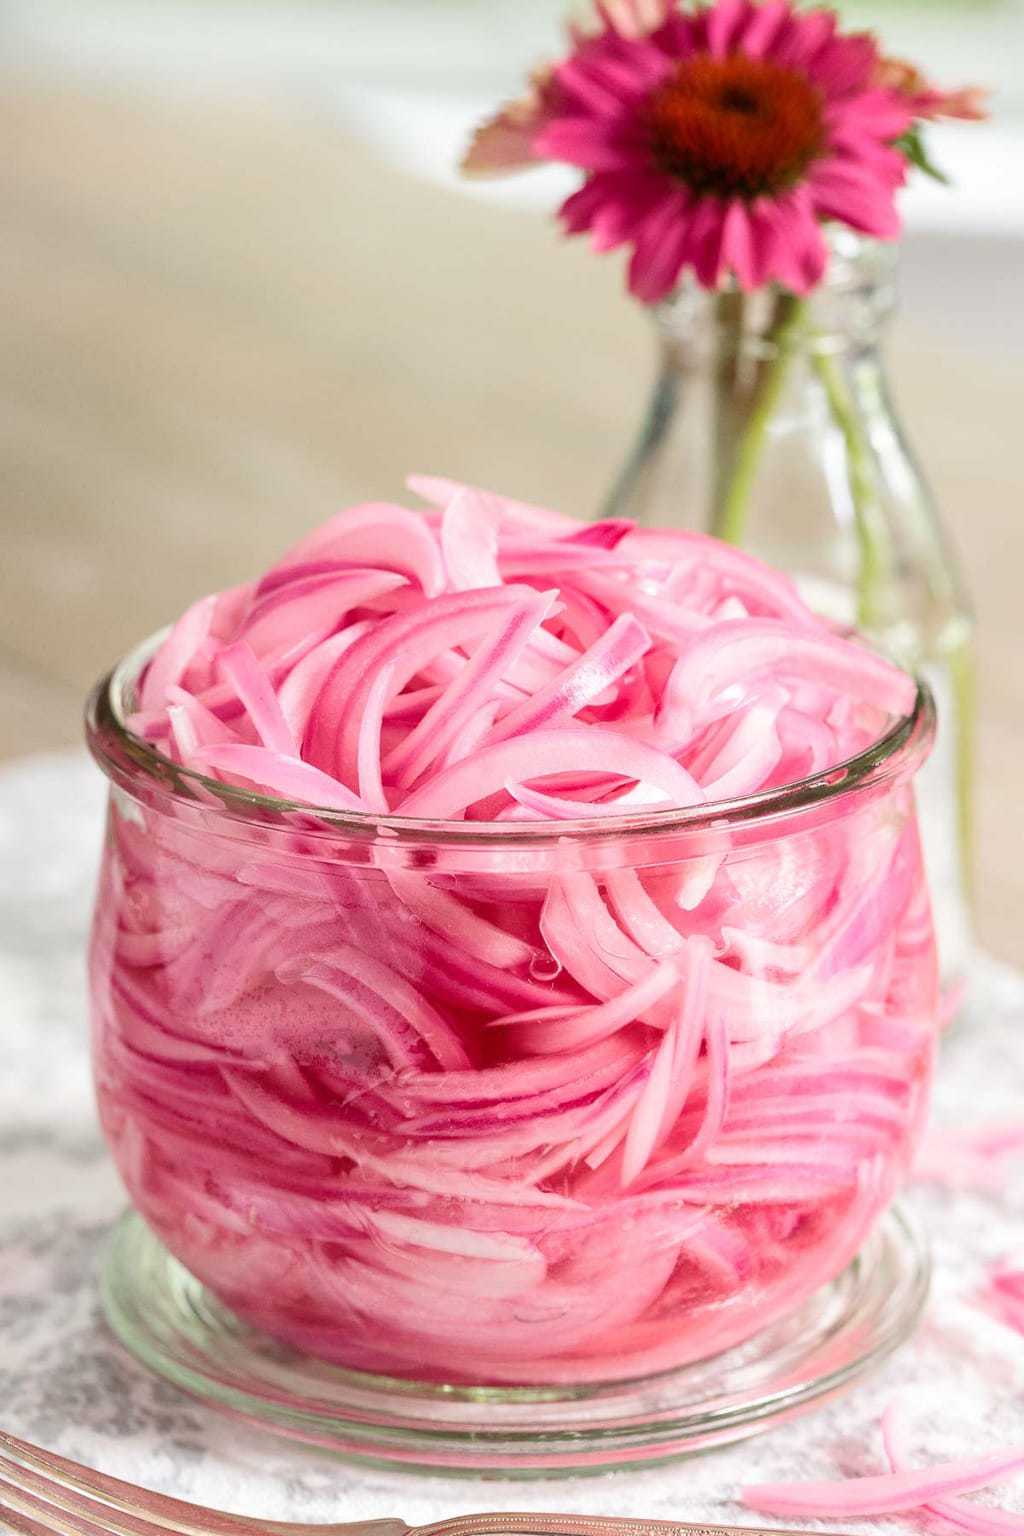 Photo of a glass jar of Pickled Red Onions on a table with a coneflower in a vase in the background.